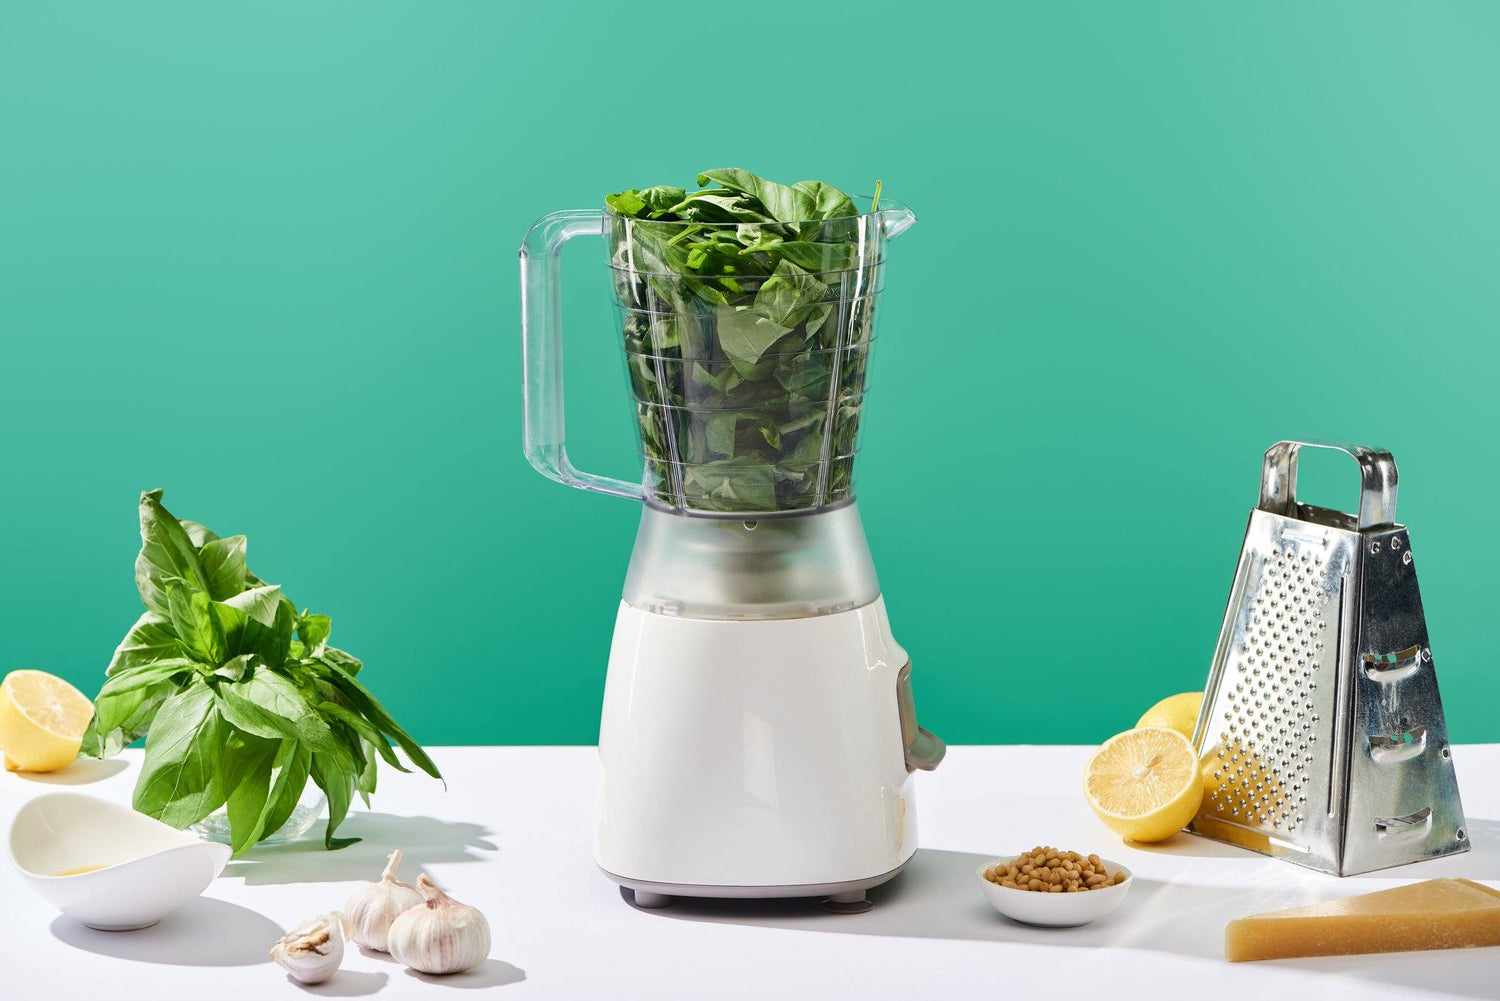 What Is A Food Processor & What Do You Use It For?